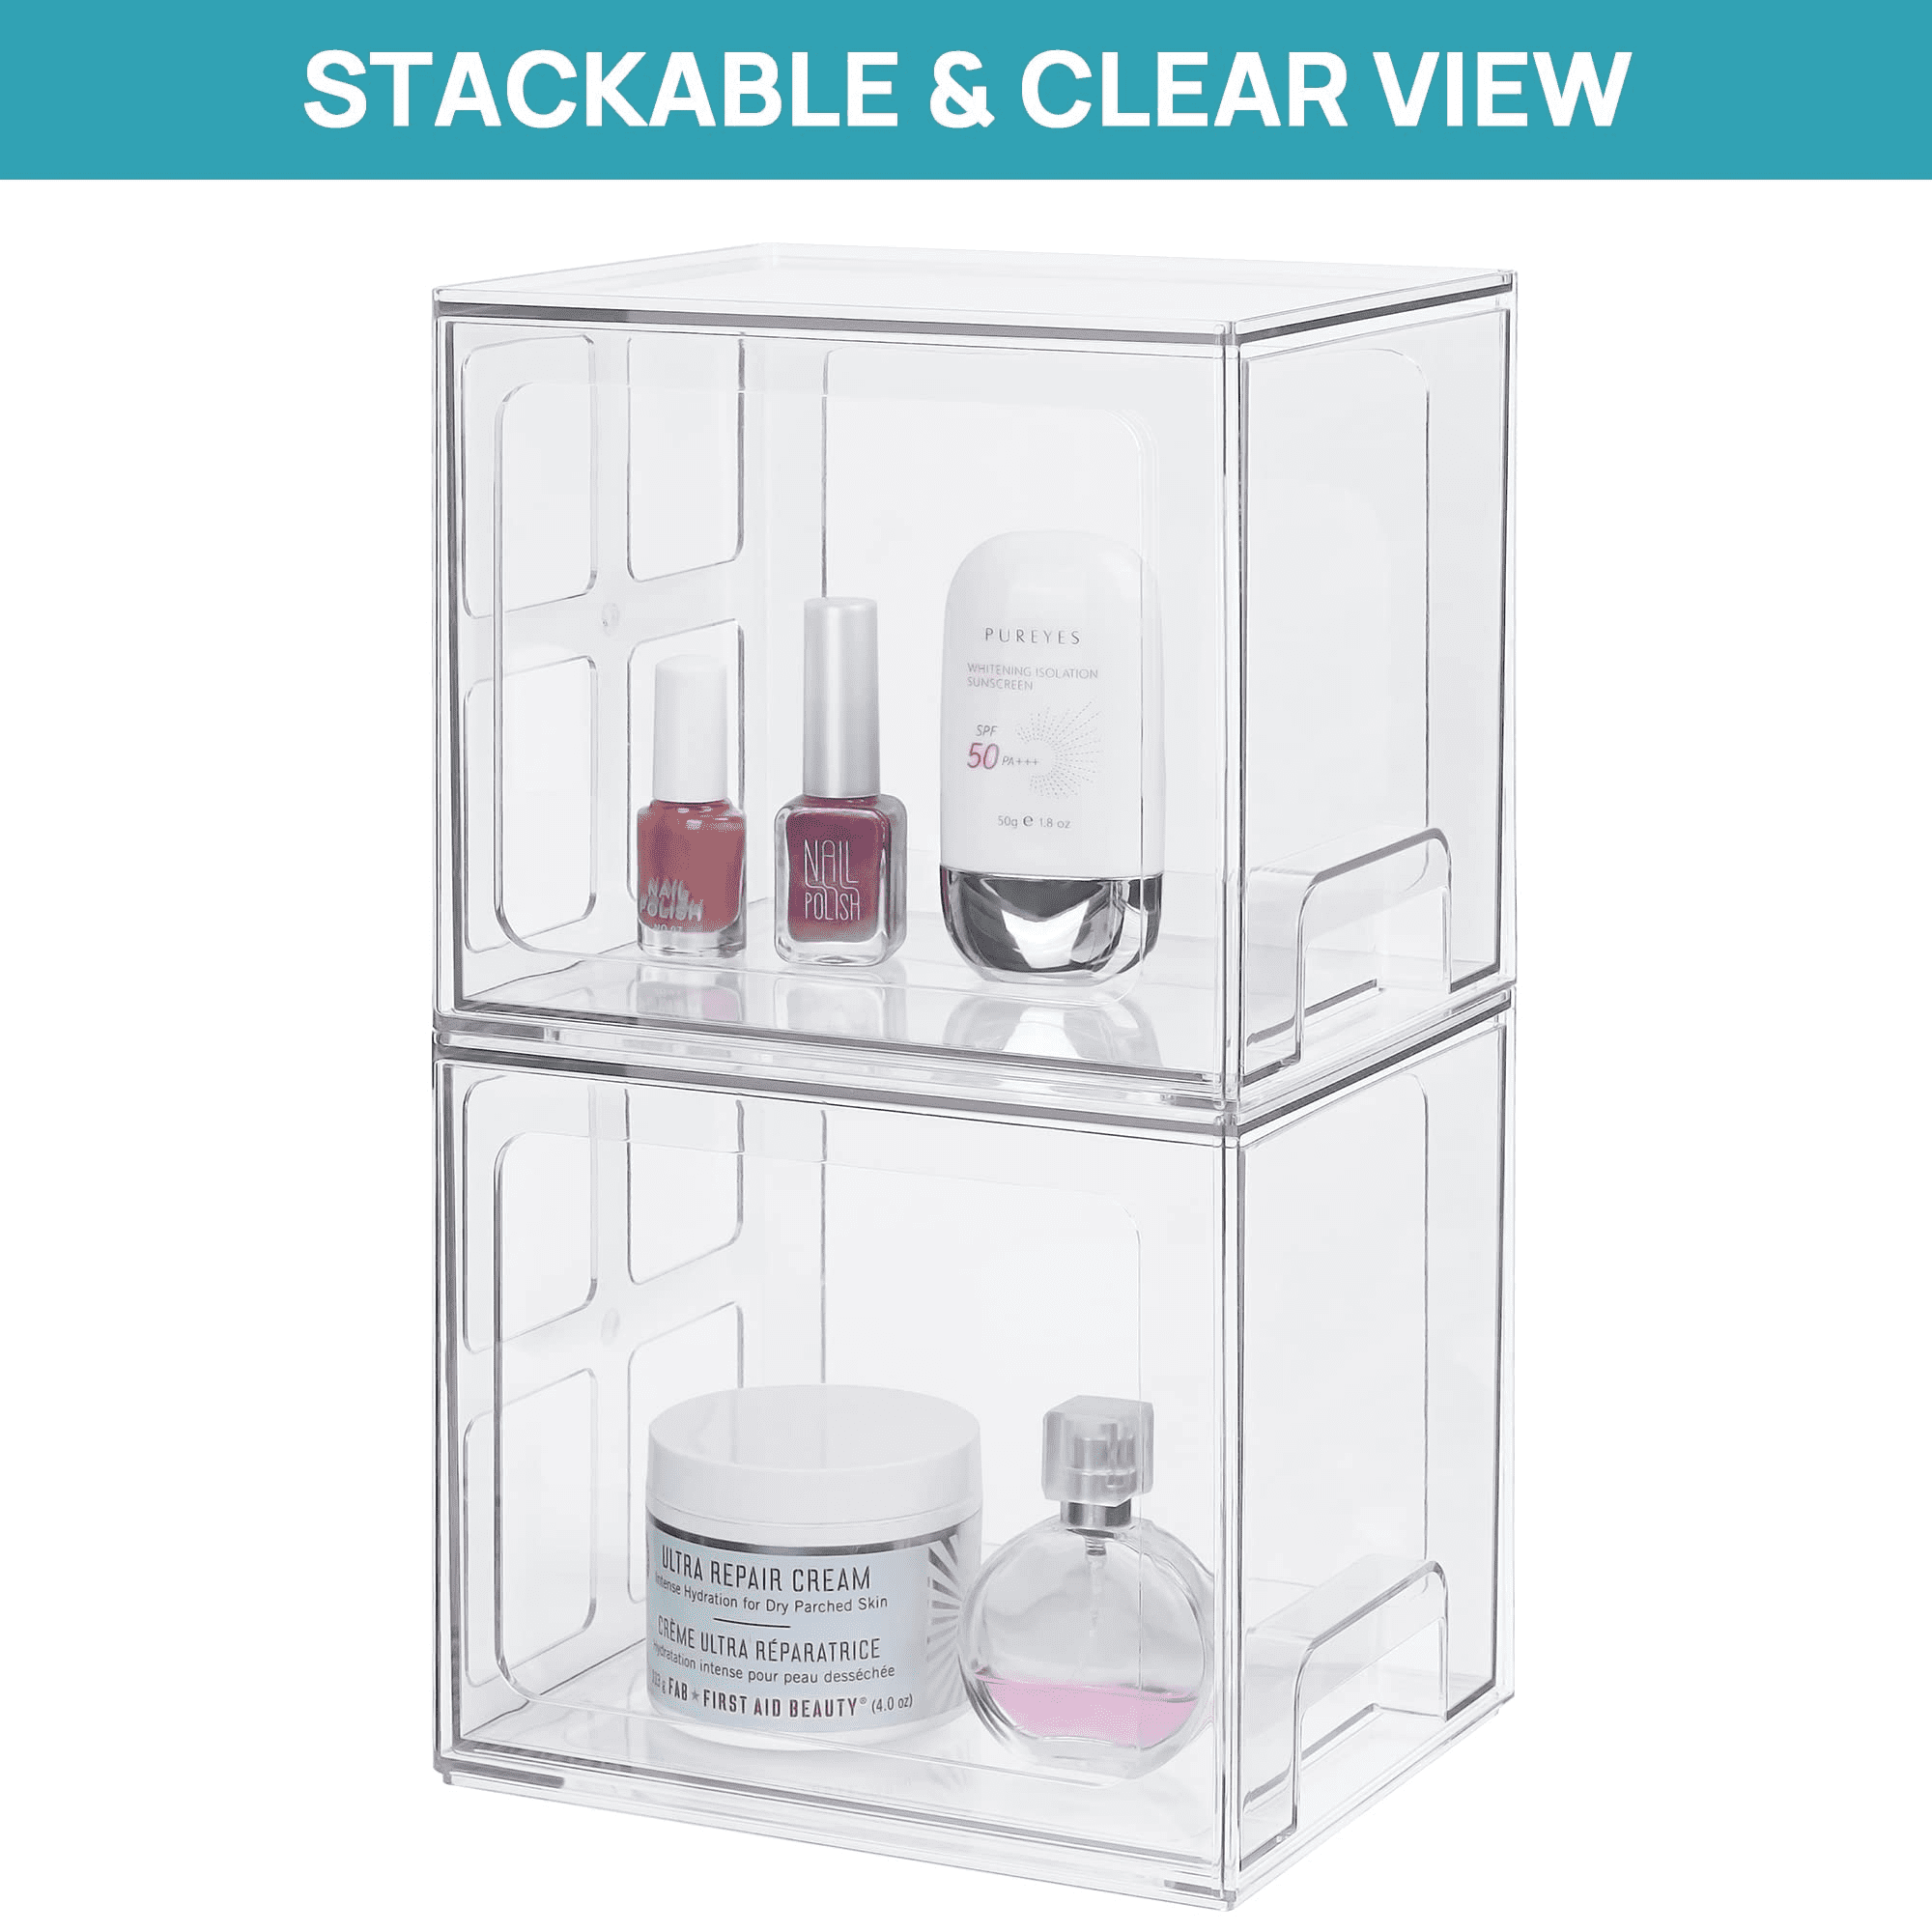 2 Pack Stackable Makeup Organizer Storage Drawers, Vtopmart 4.4'' Tall  Acrylic Bathroom Organizers，Clear Plastic Storage Bins For Vanity,  Undersink, Kitchen Cabinets, Pantry Organization and Storage